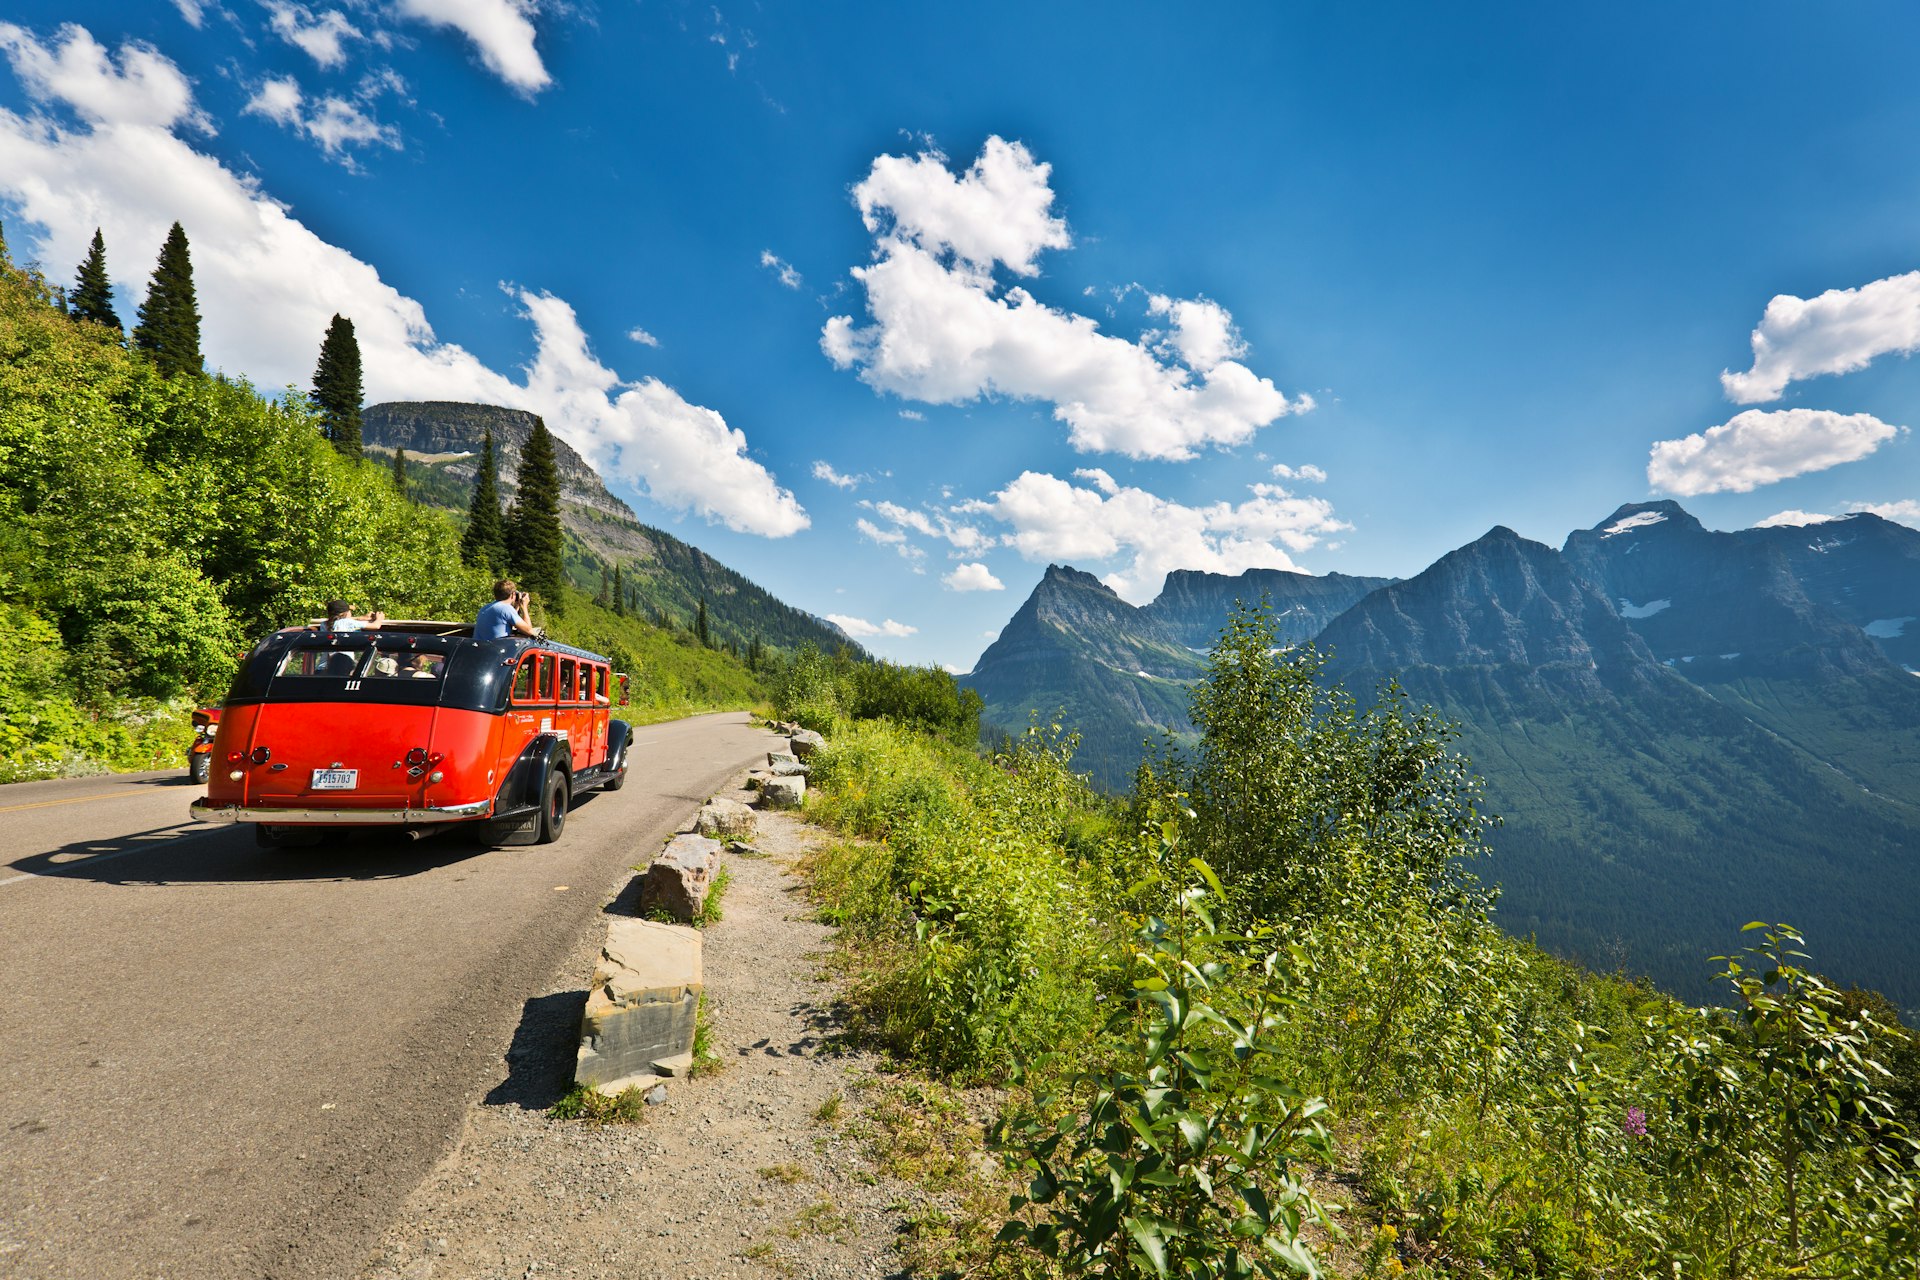 Visitors to Glacier National Park on the Going To The Sun Road